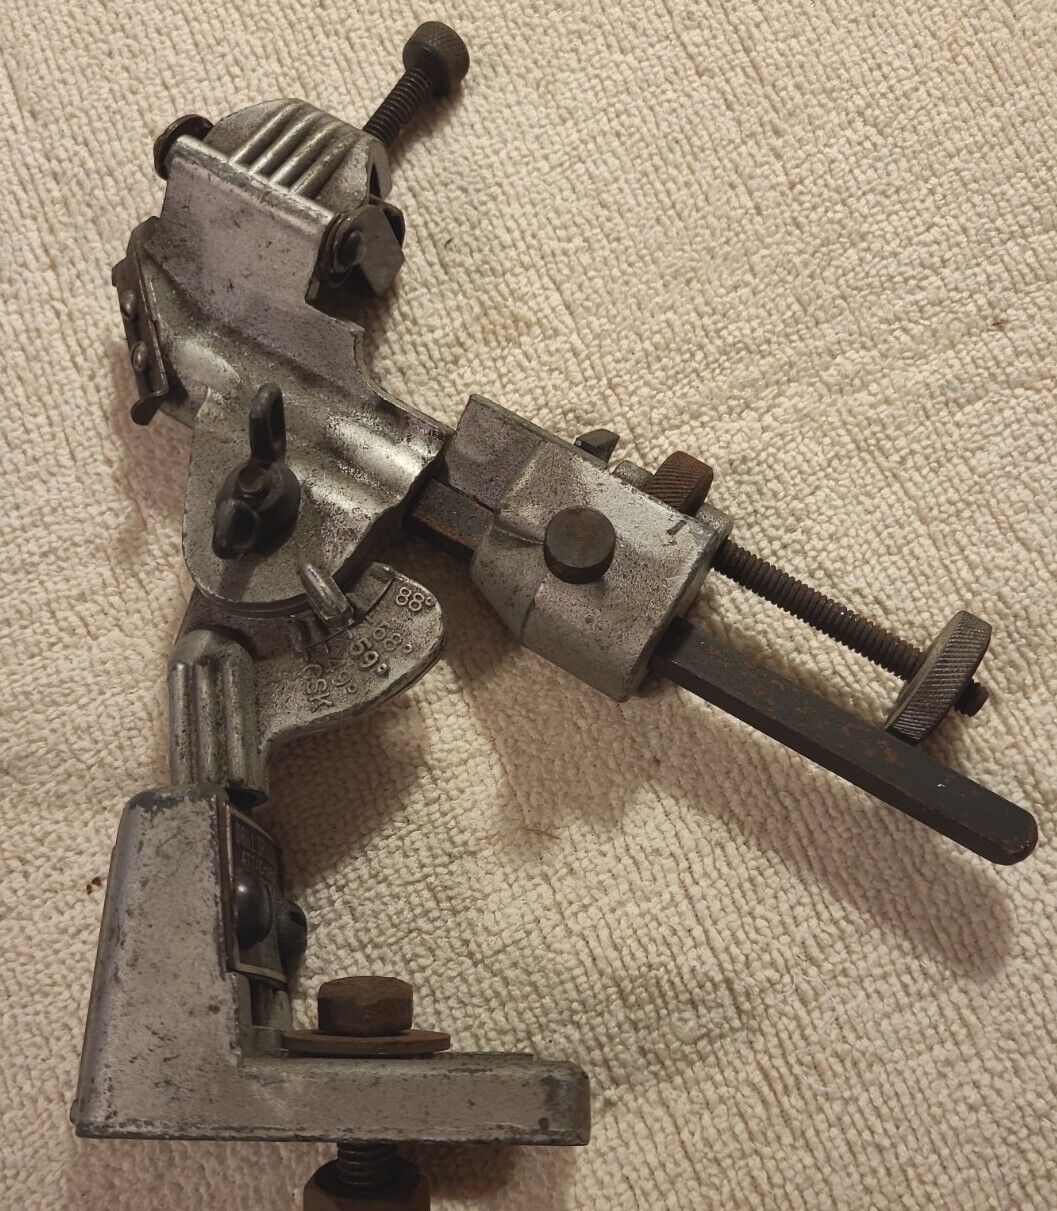 Vintage General Drill Grinding Attachment For Drills - No. 825 - Adjustable